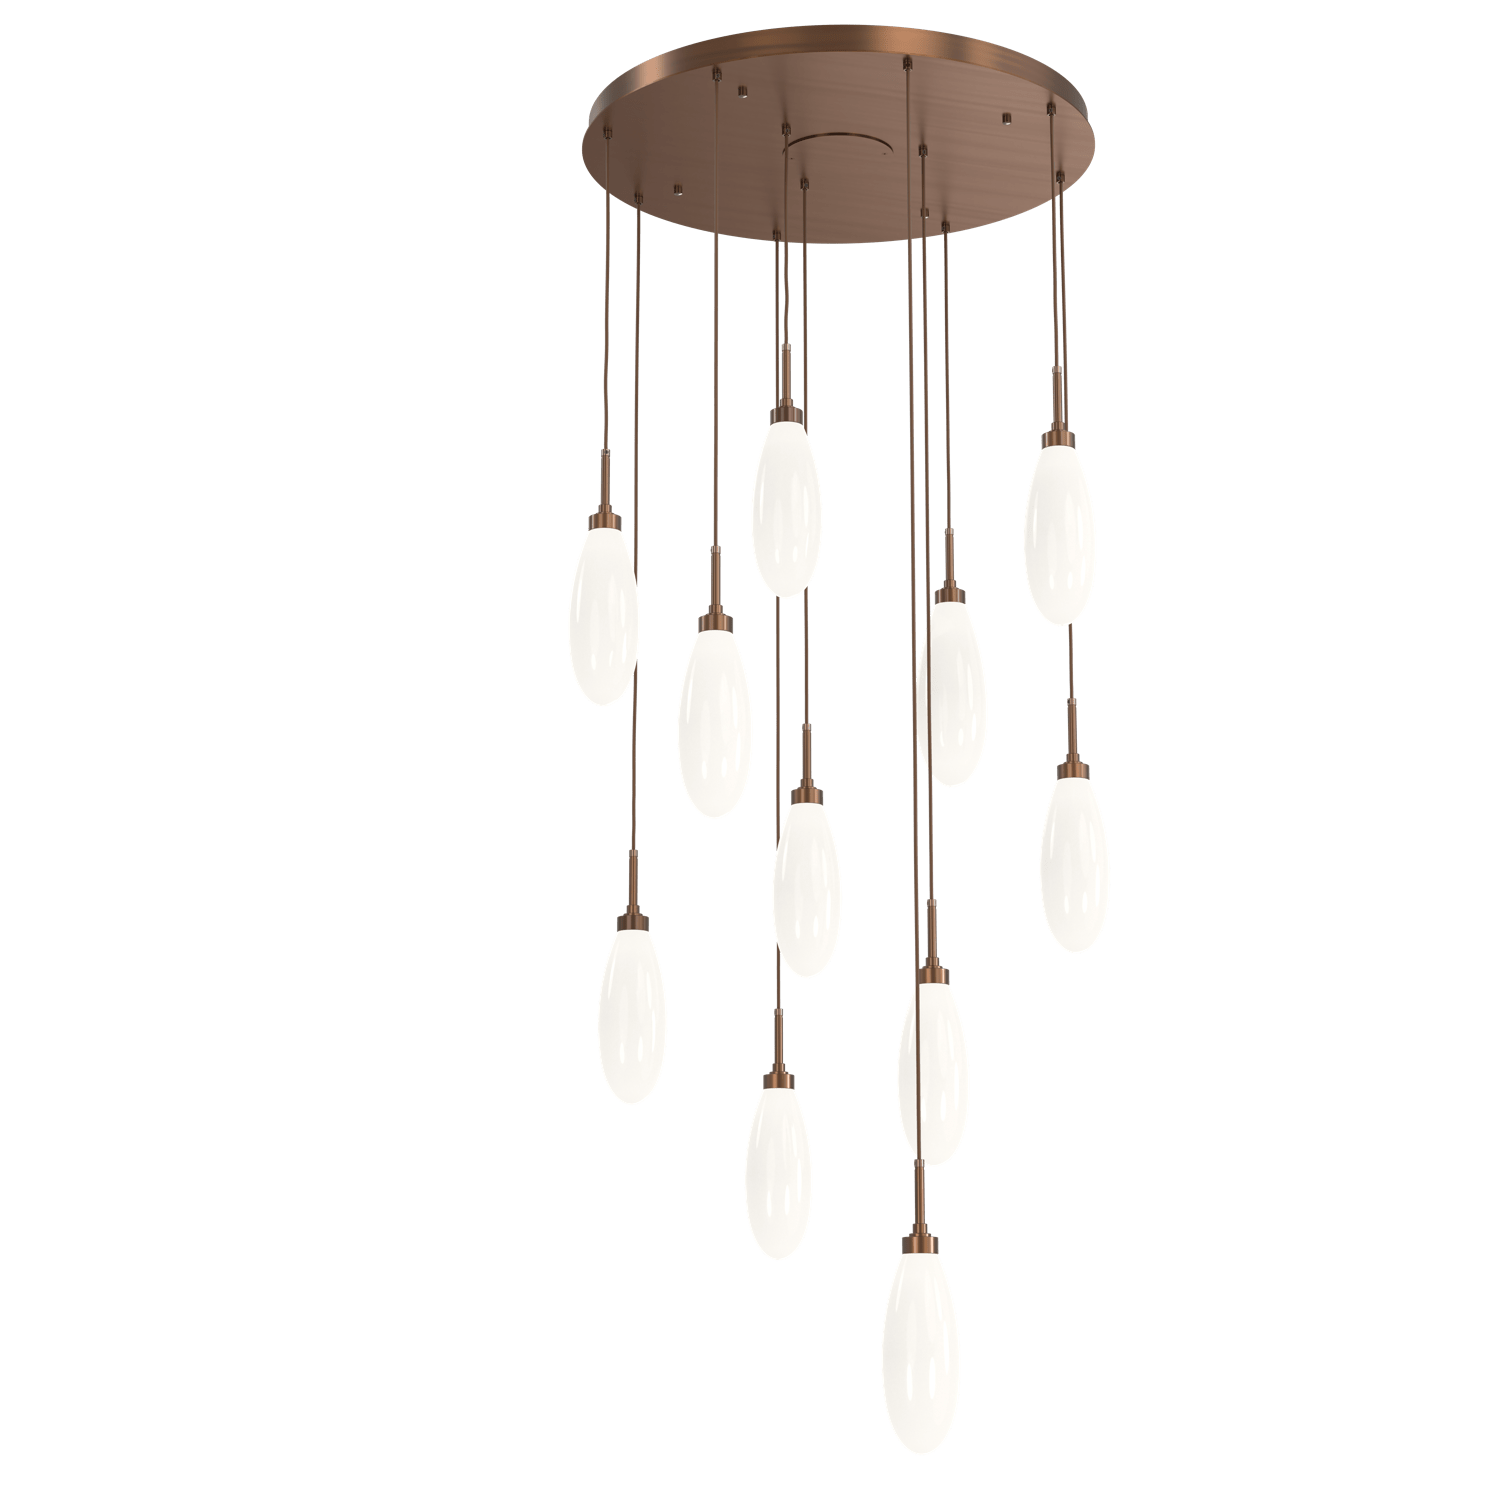 CHB0071-11-RB-WL-LL-Hammerton-Studio-Fiori-11-light-round-pendant-chandelier-with-oil-rubbed-bronze-finish-and-opal-white-glass-shades-and-LED-lamping